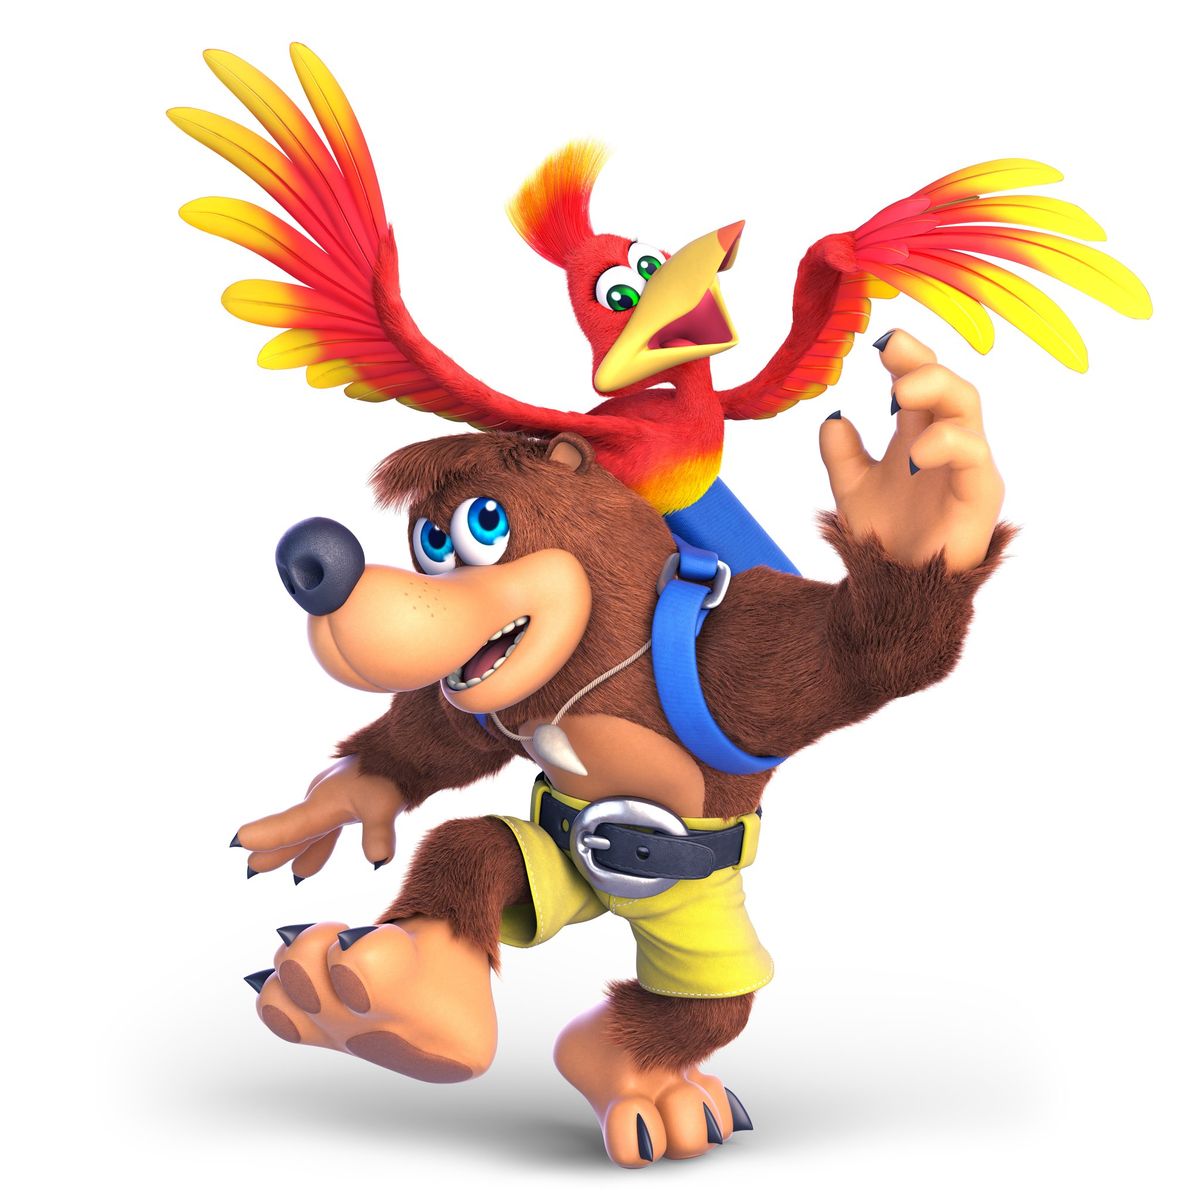 Super Smash Bros. Ultimate Banjo And Kazooie. Select this character for for counters, counter tips, and more!